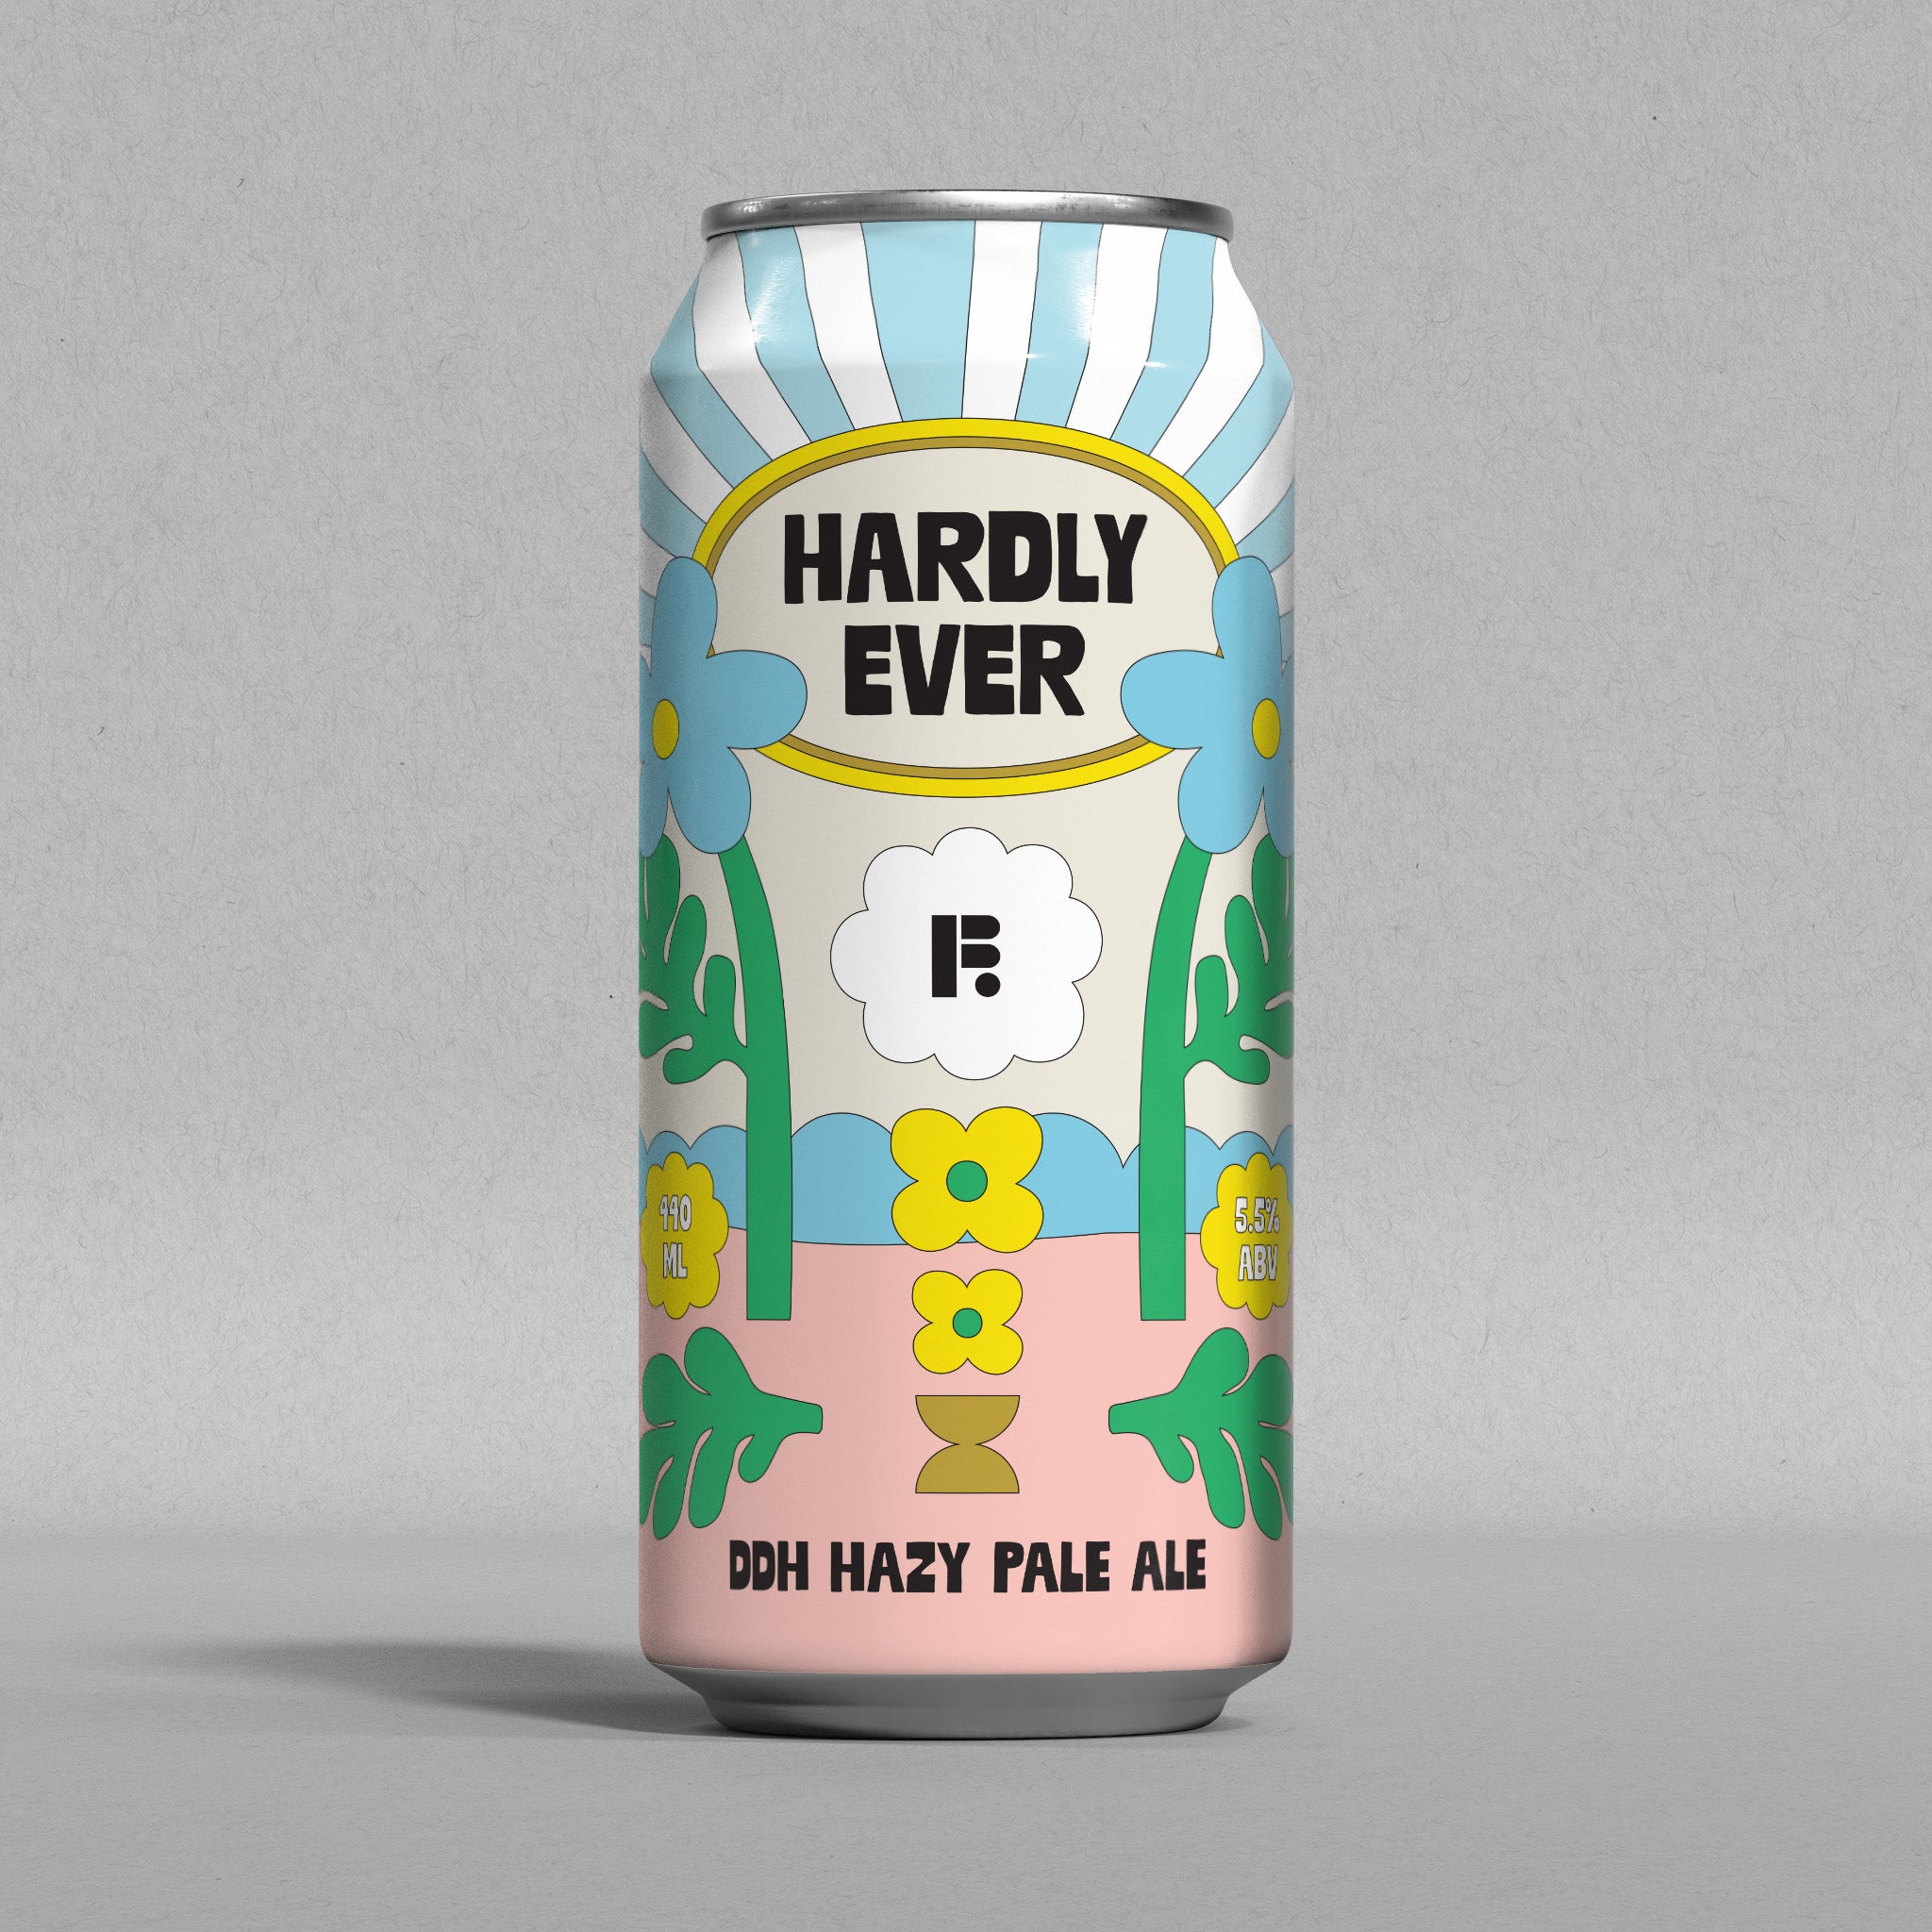 Hardly Ever - DDH Hazy Pale Ale (4 Pack)